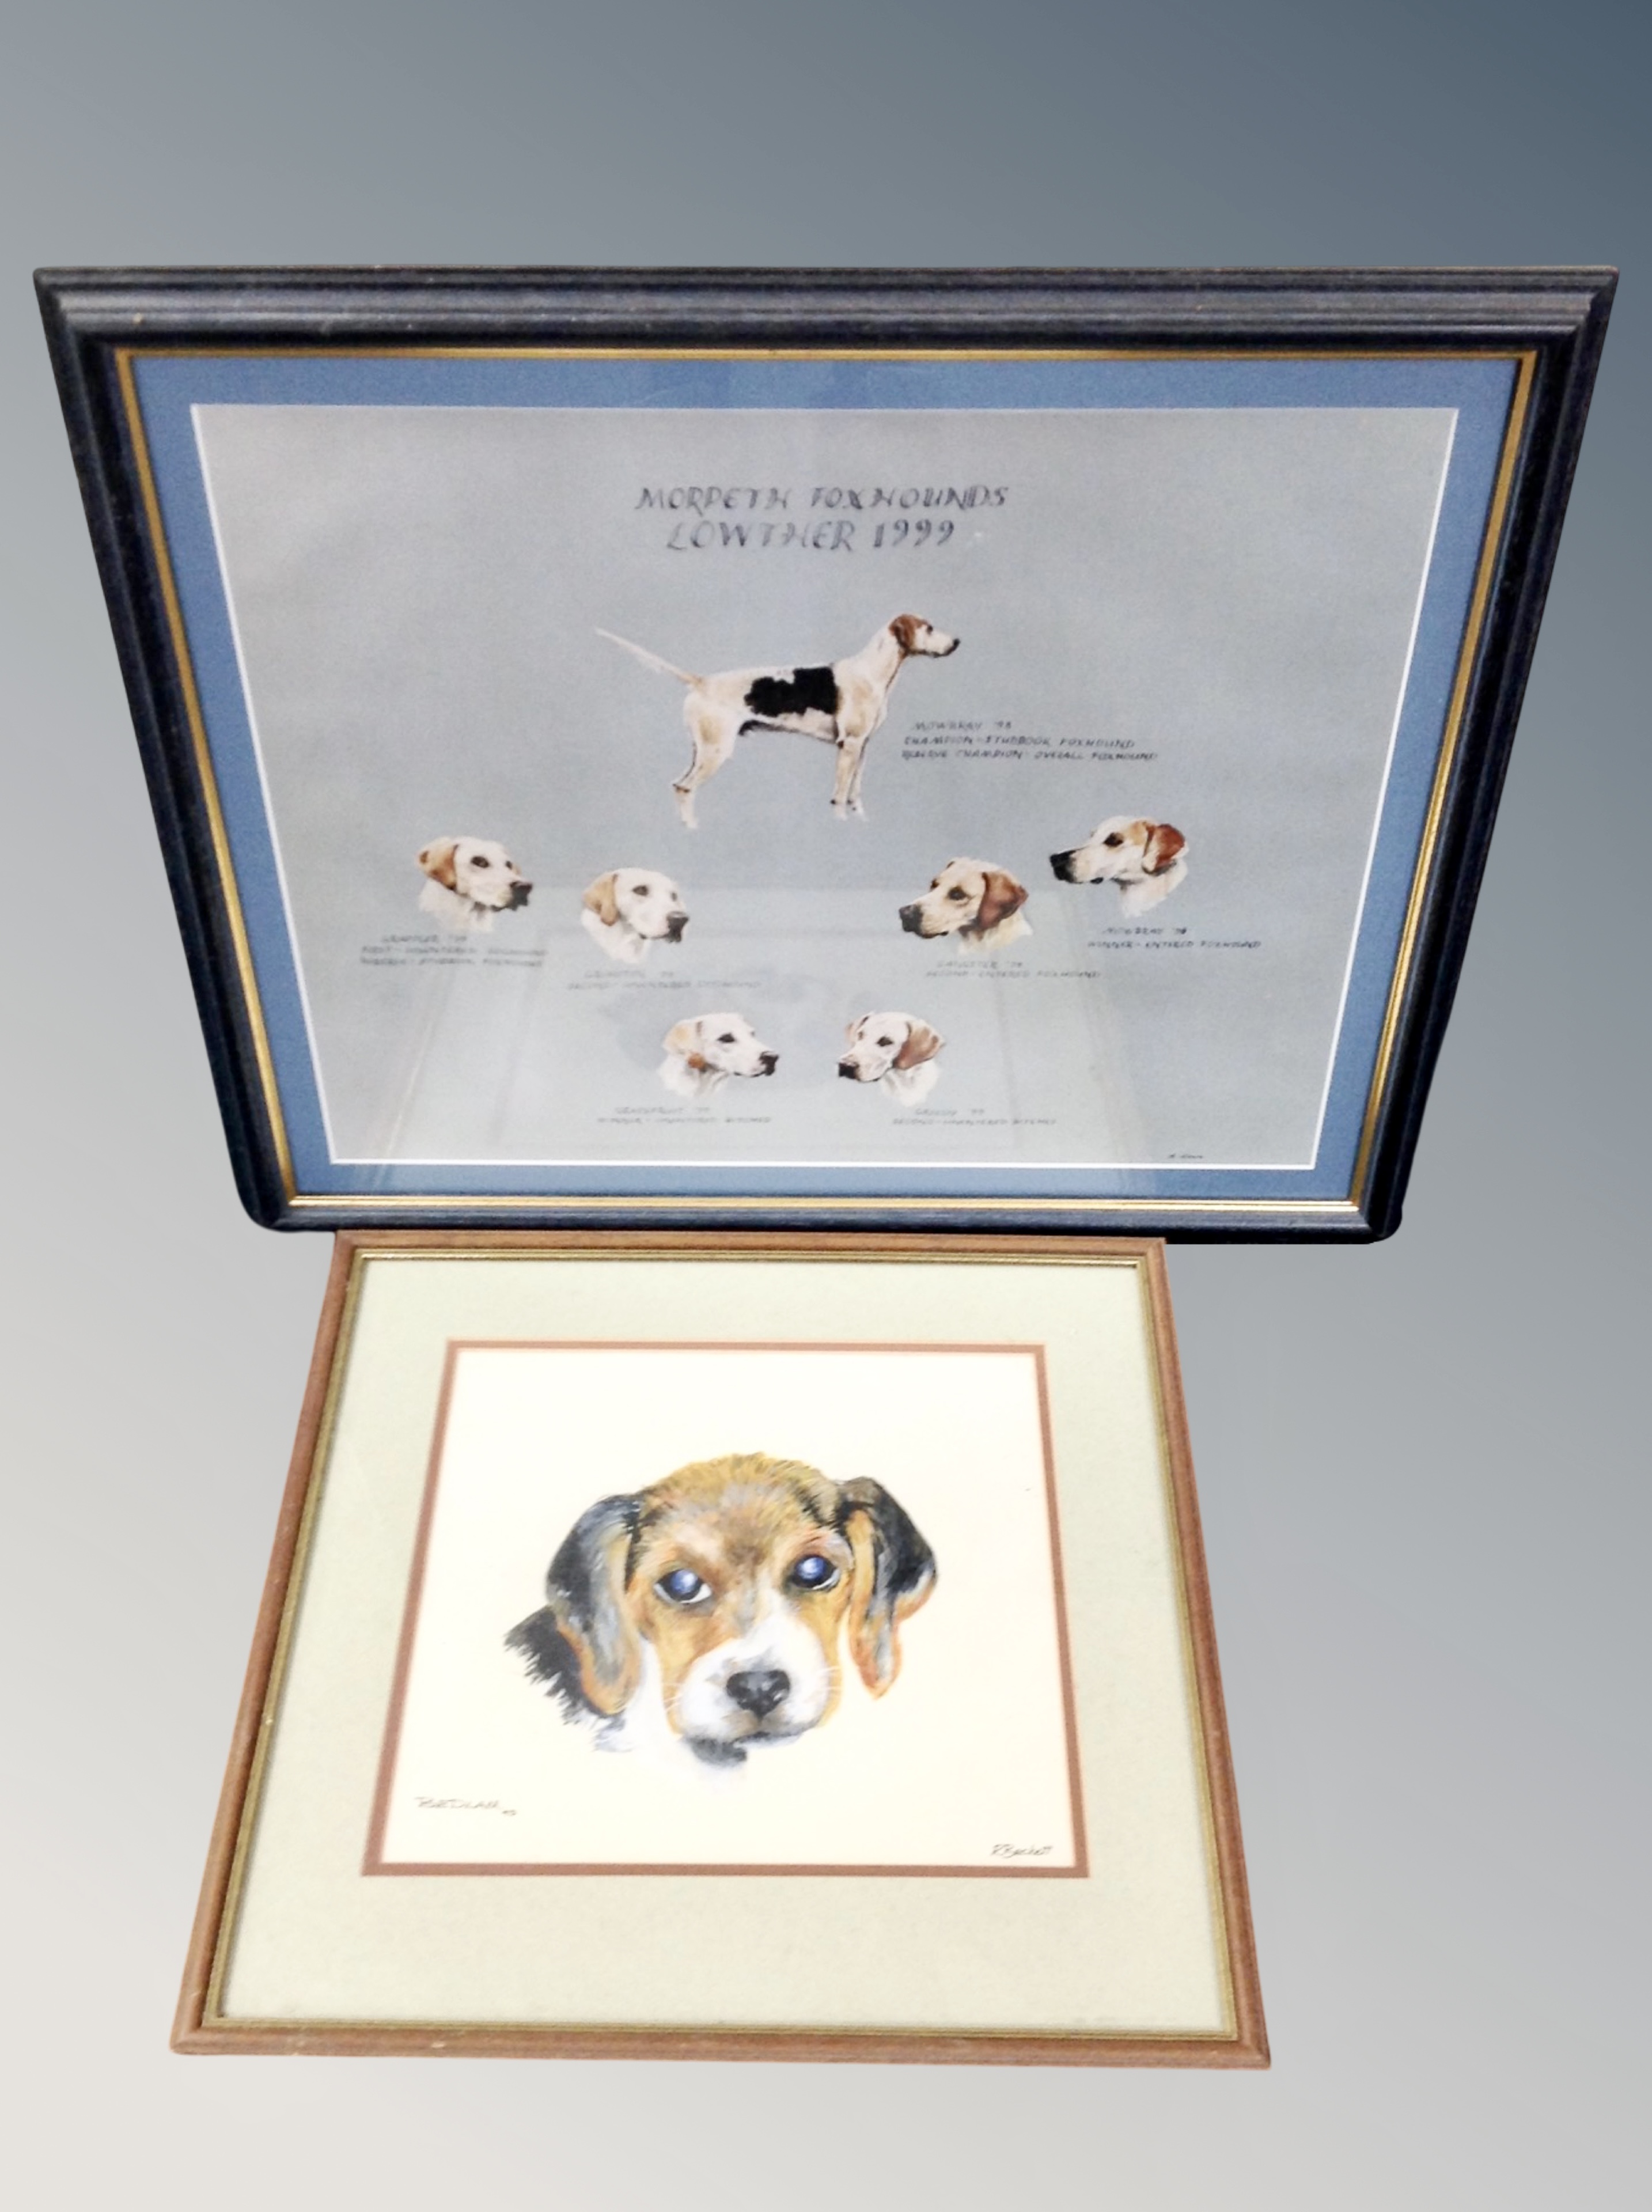 Two framed prints depicting Morpeth Fox Hounds,